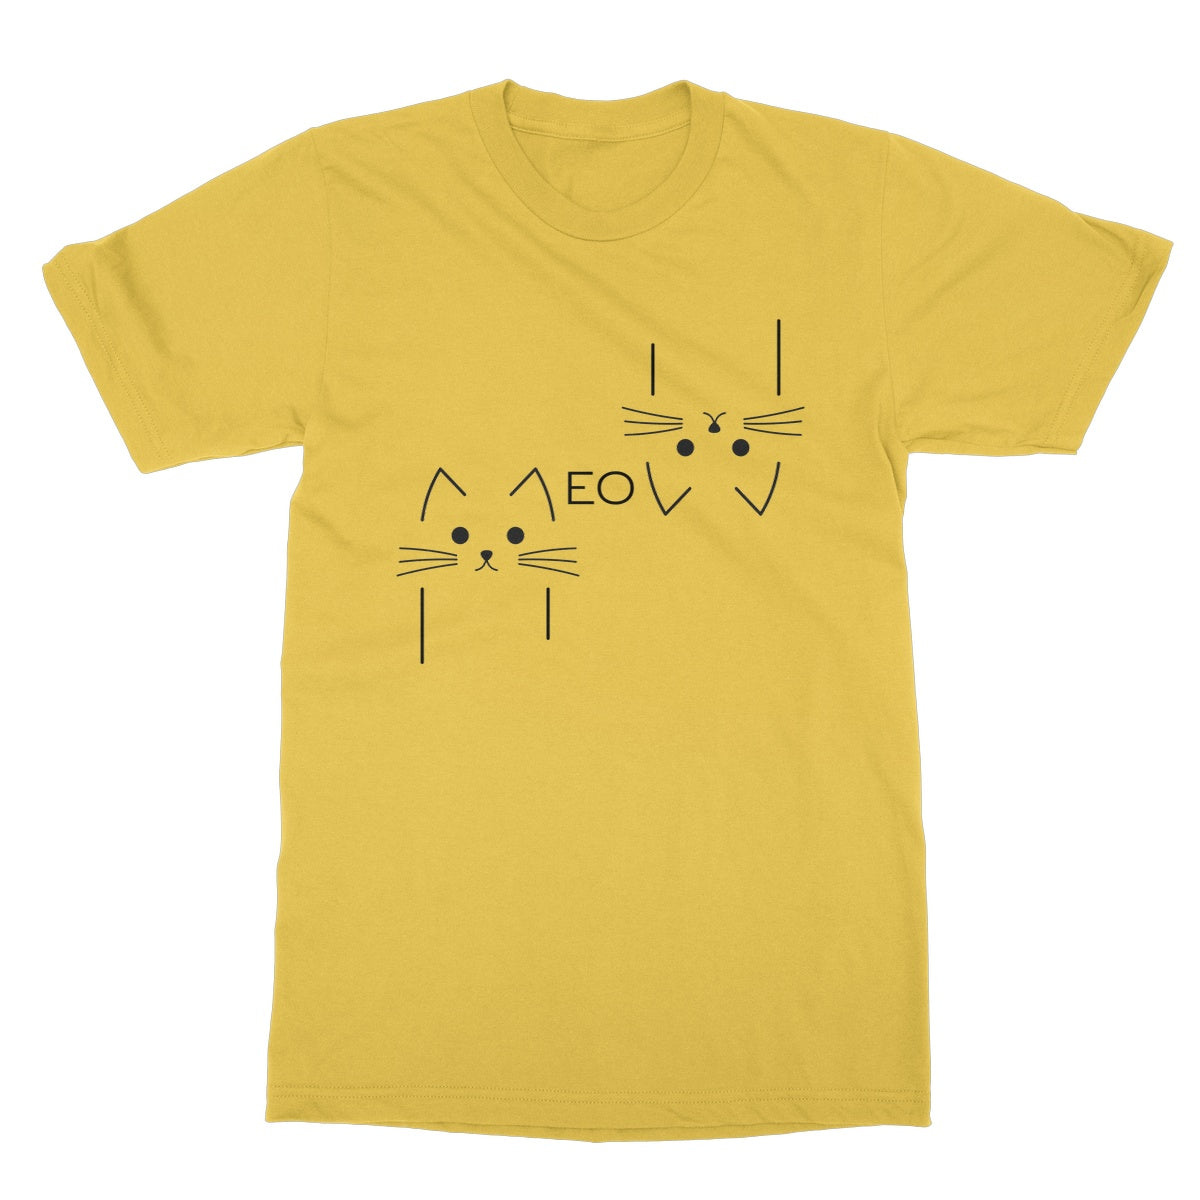 meow outline t shirt yellow